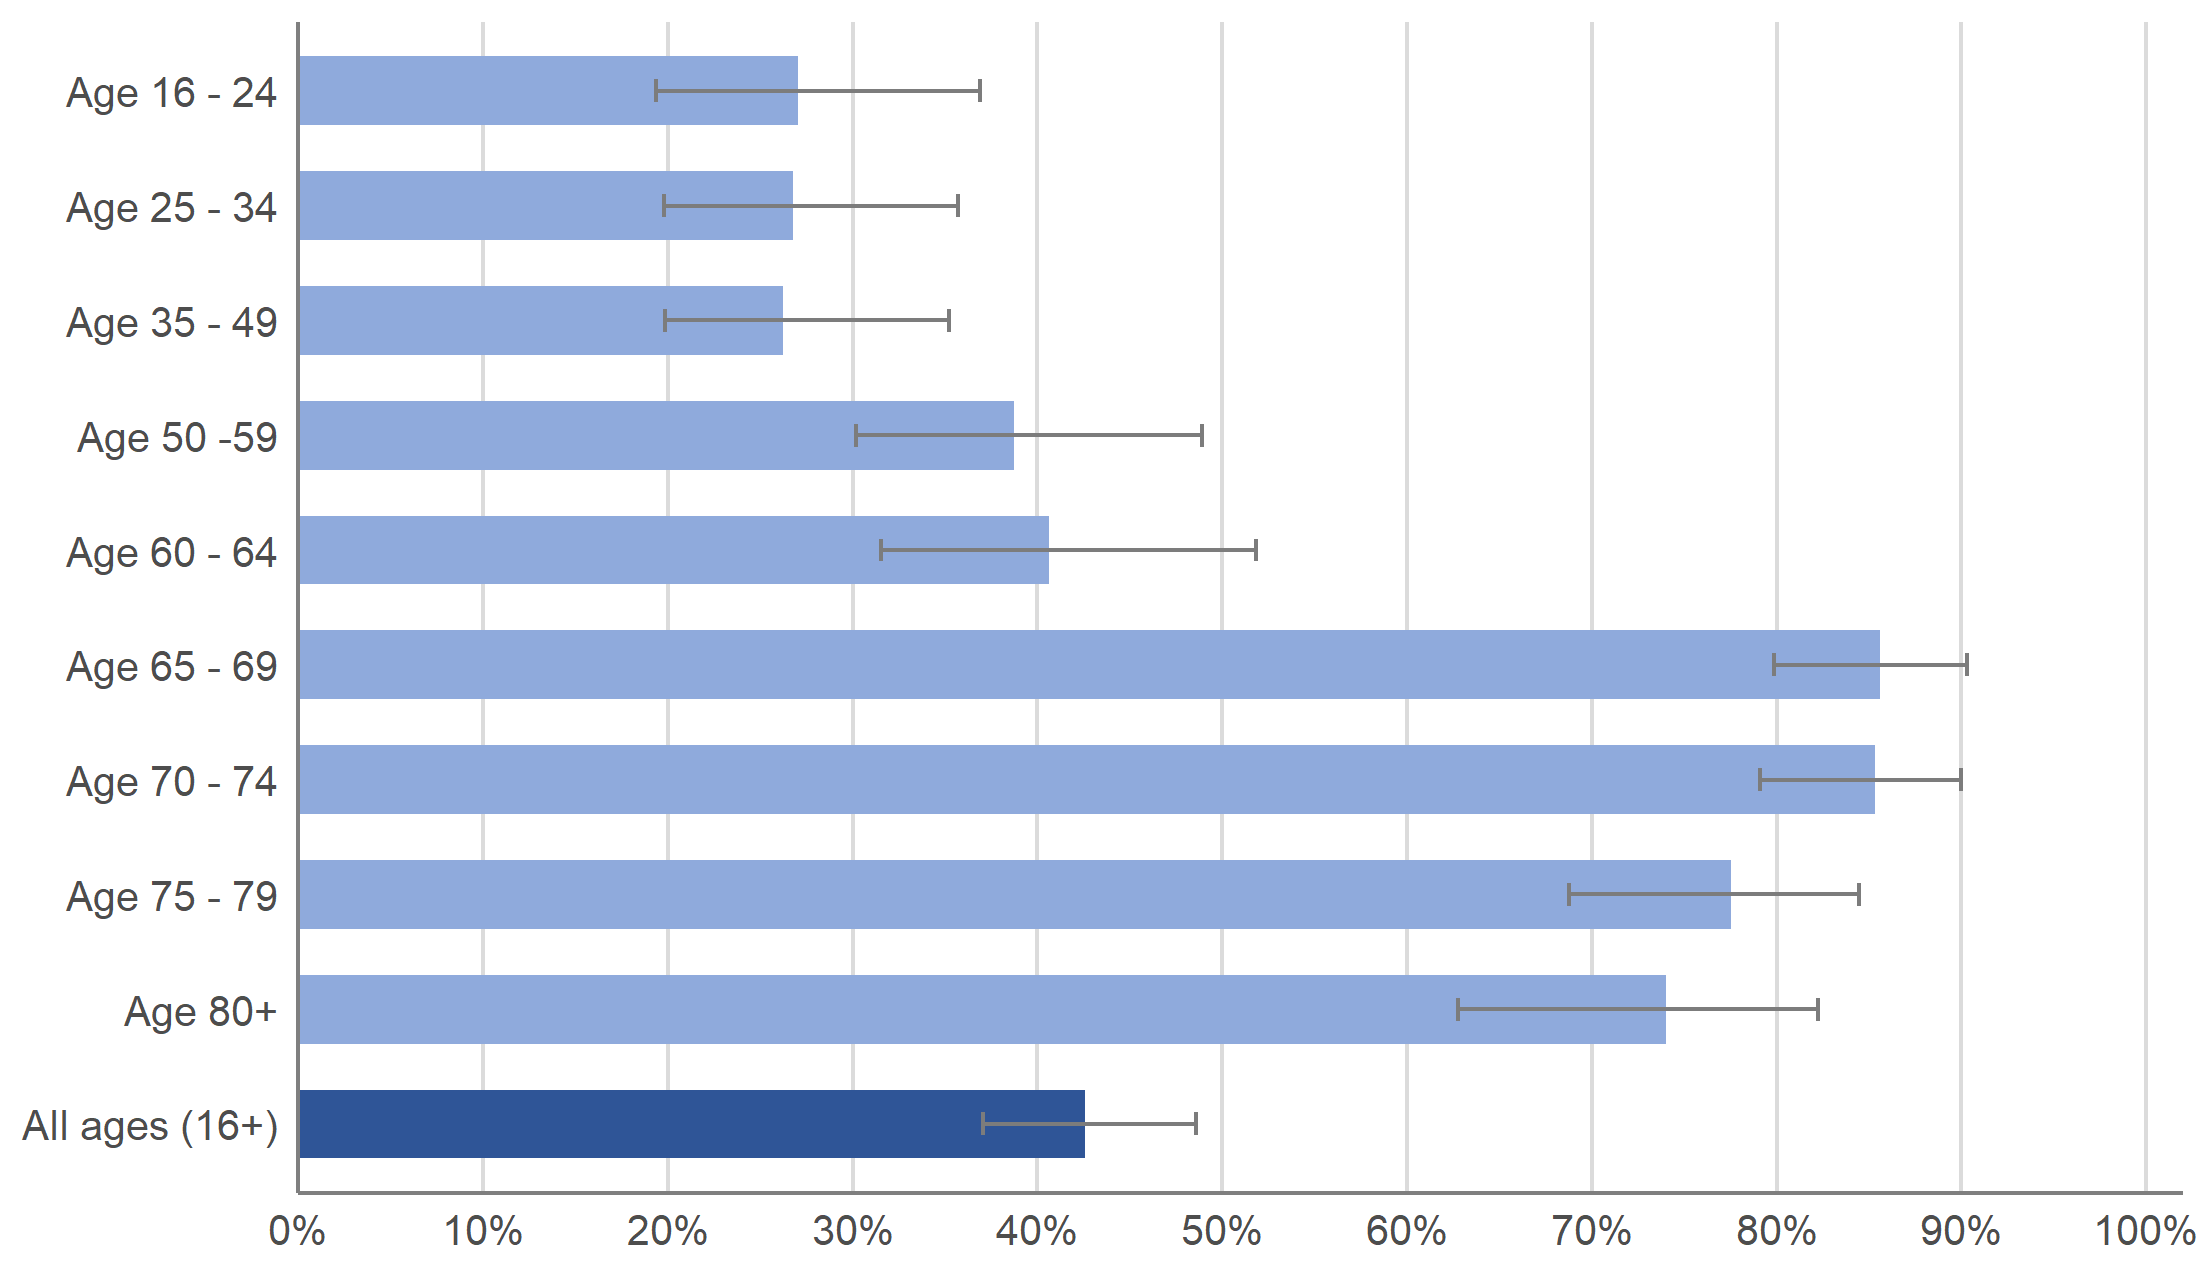 The chart shows modelled percentages of people testing positive for antibodies to SARS-CoV-2 from a blood sample, by age group, in the week 8 to 14 March 2021, including 95% credible intervals. Antibody positivity was higher in those aged 65 and over than those aged under 65.